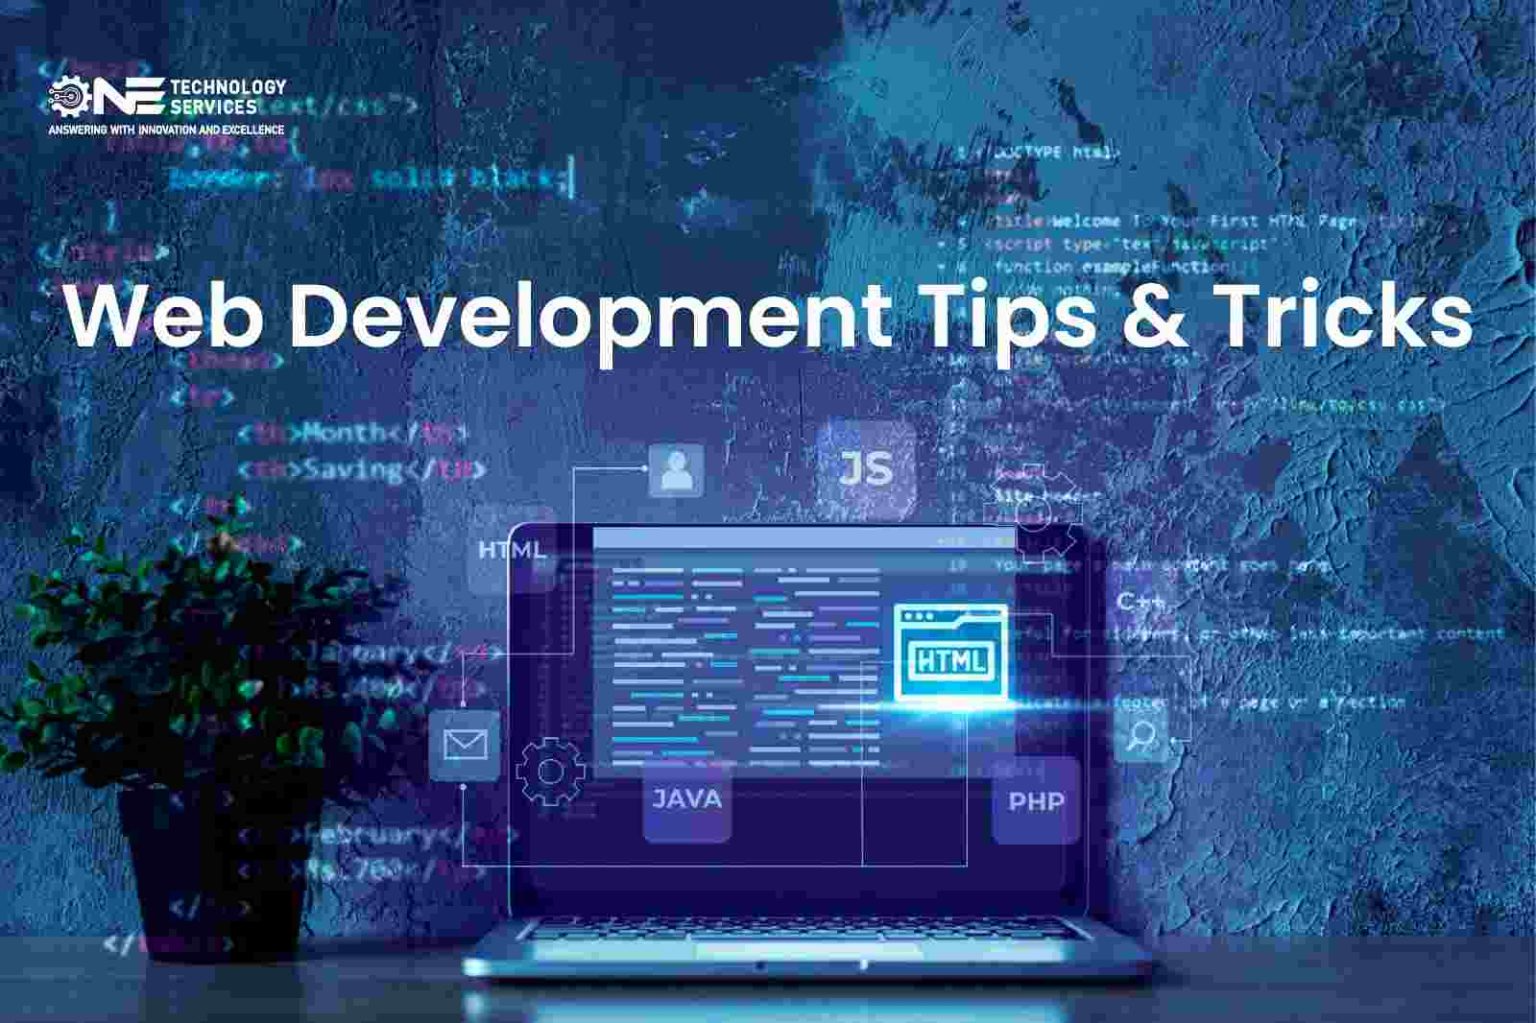 Web Development Best Practices: Tips and Tricks